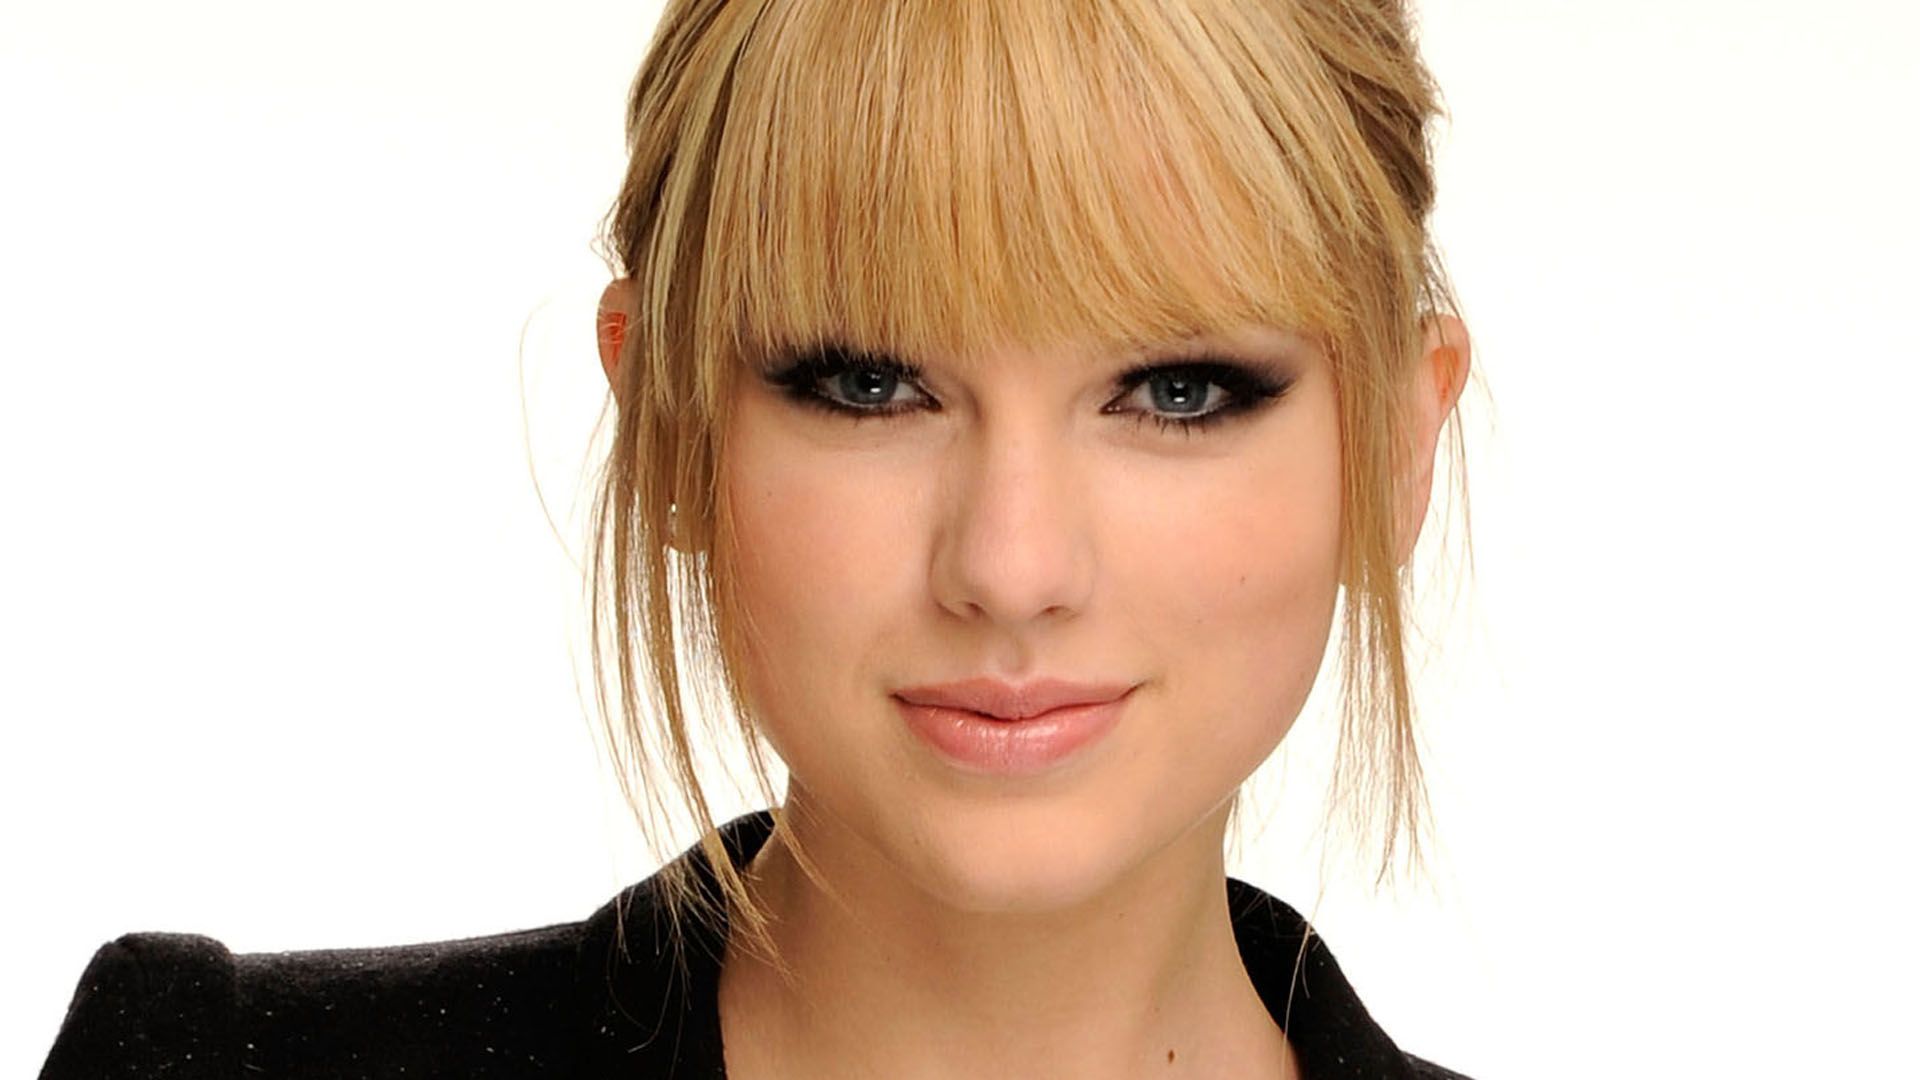 Taylor Swift Wallpapers - HD – HdCoolWallpapers.Com